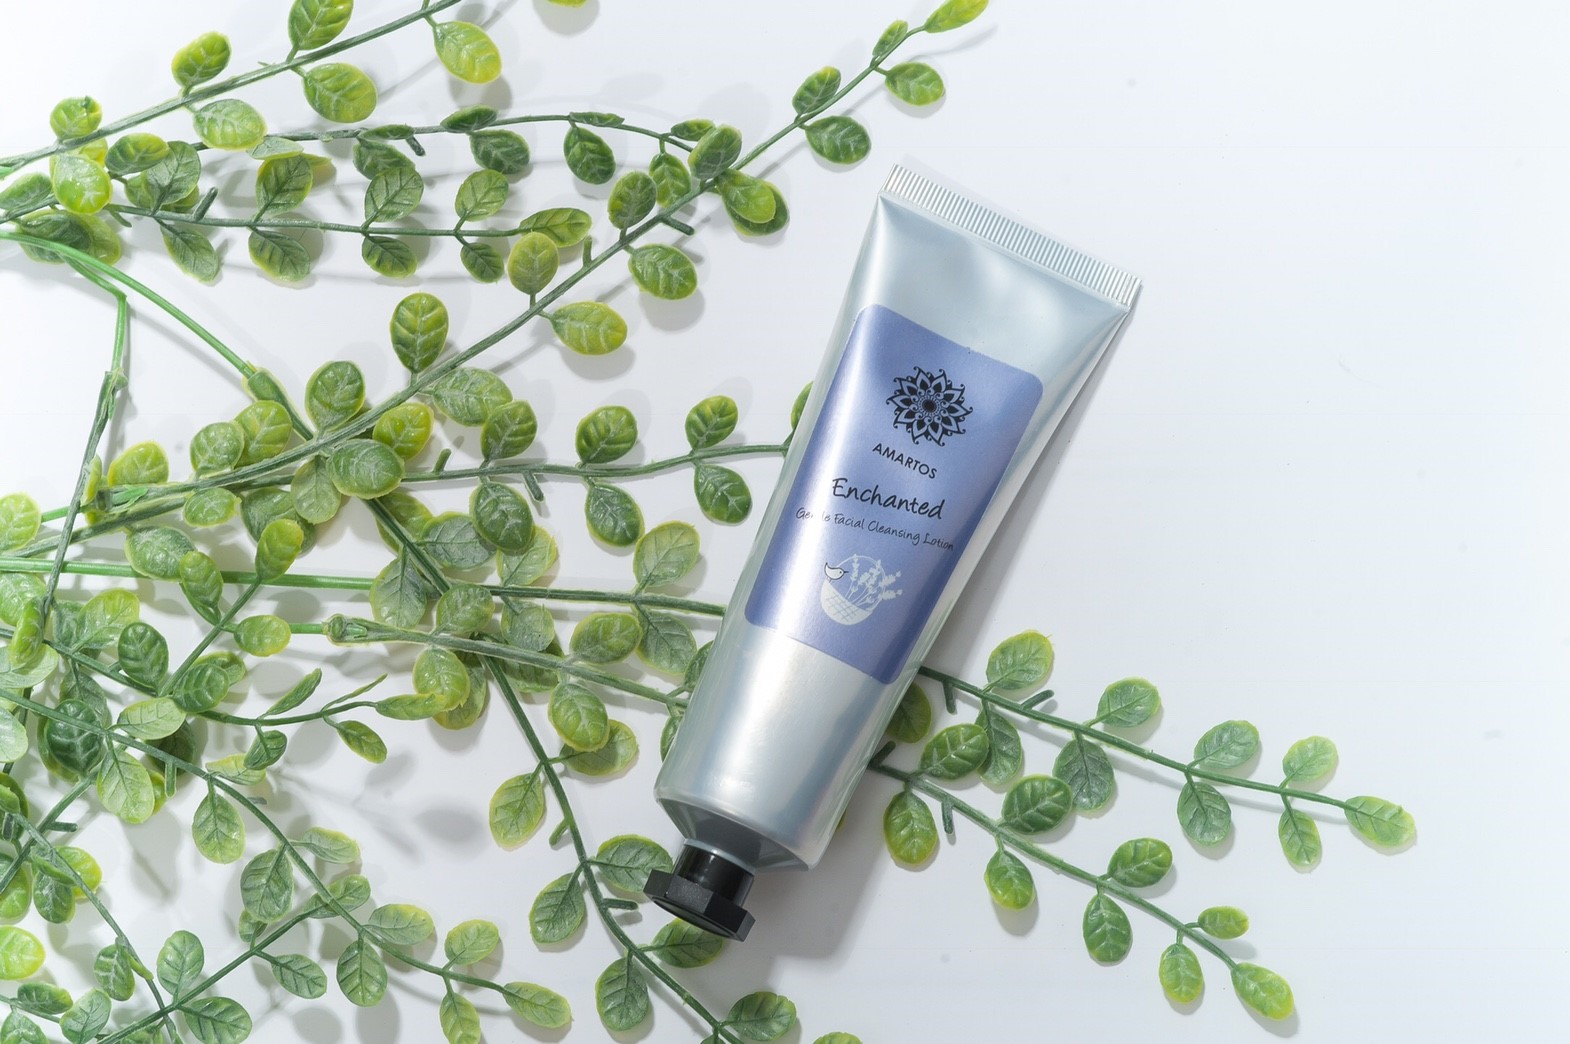 ENCHANTED - GENTLE FACIAL CLEANSING LOTION